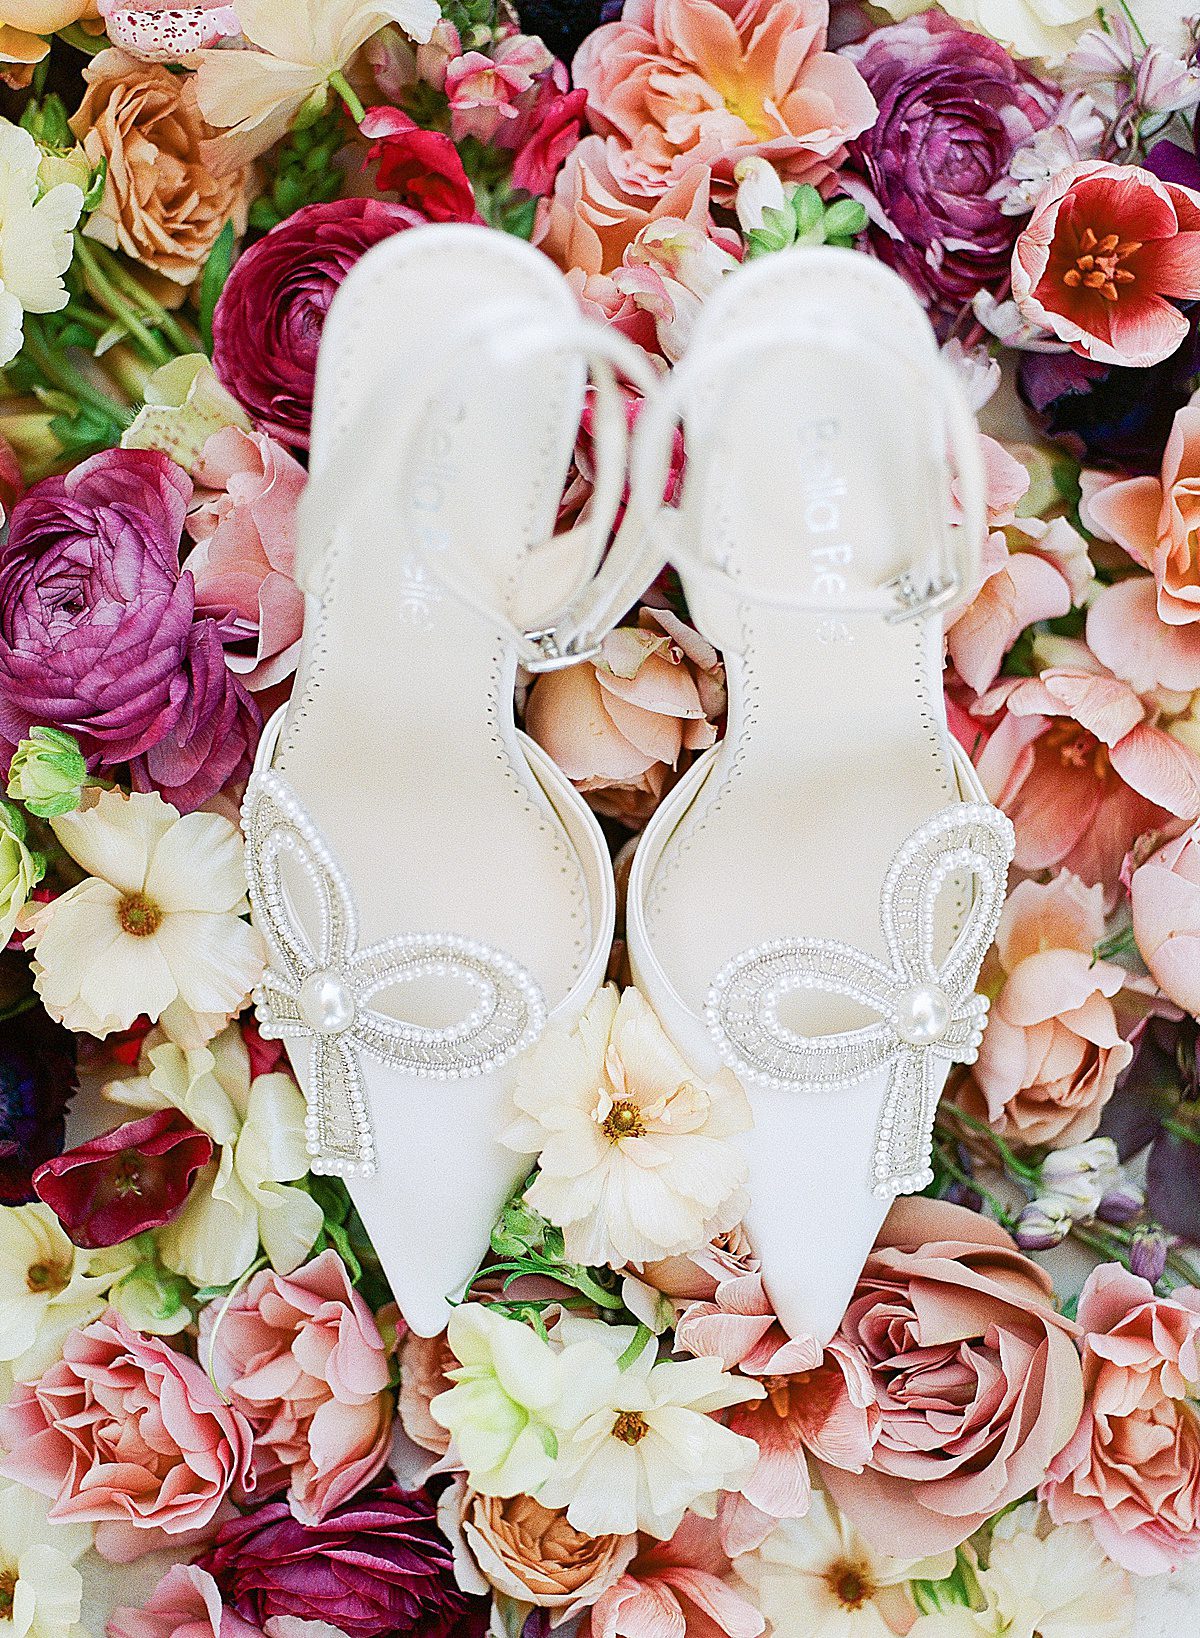 Bella Belle Shoes with Flowers Photo